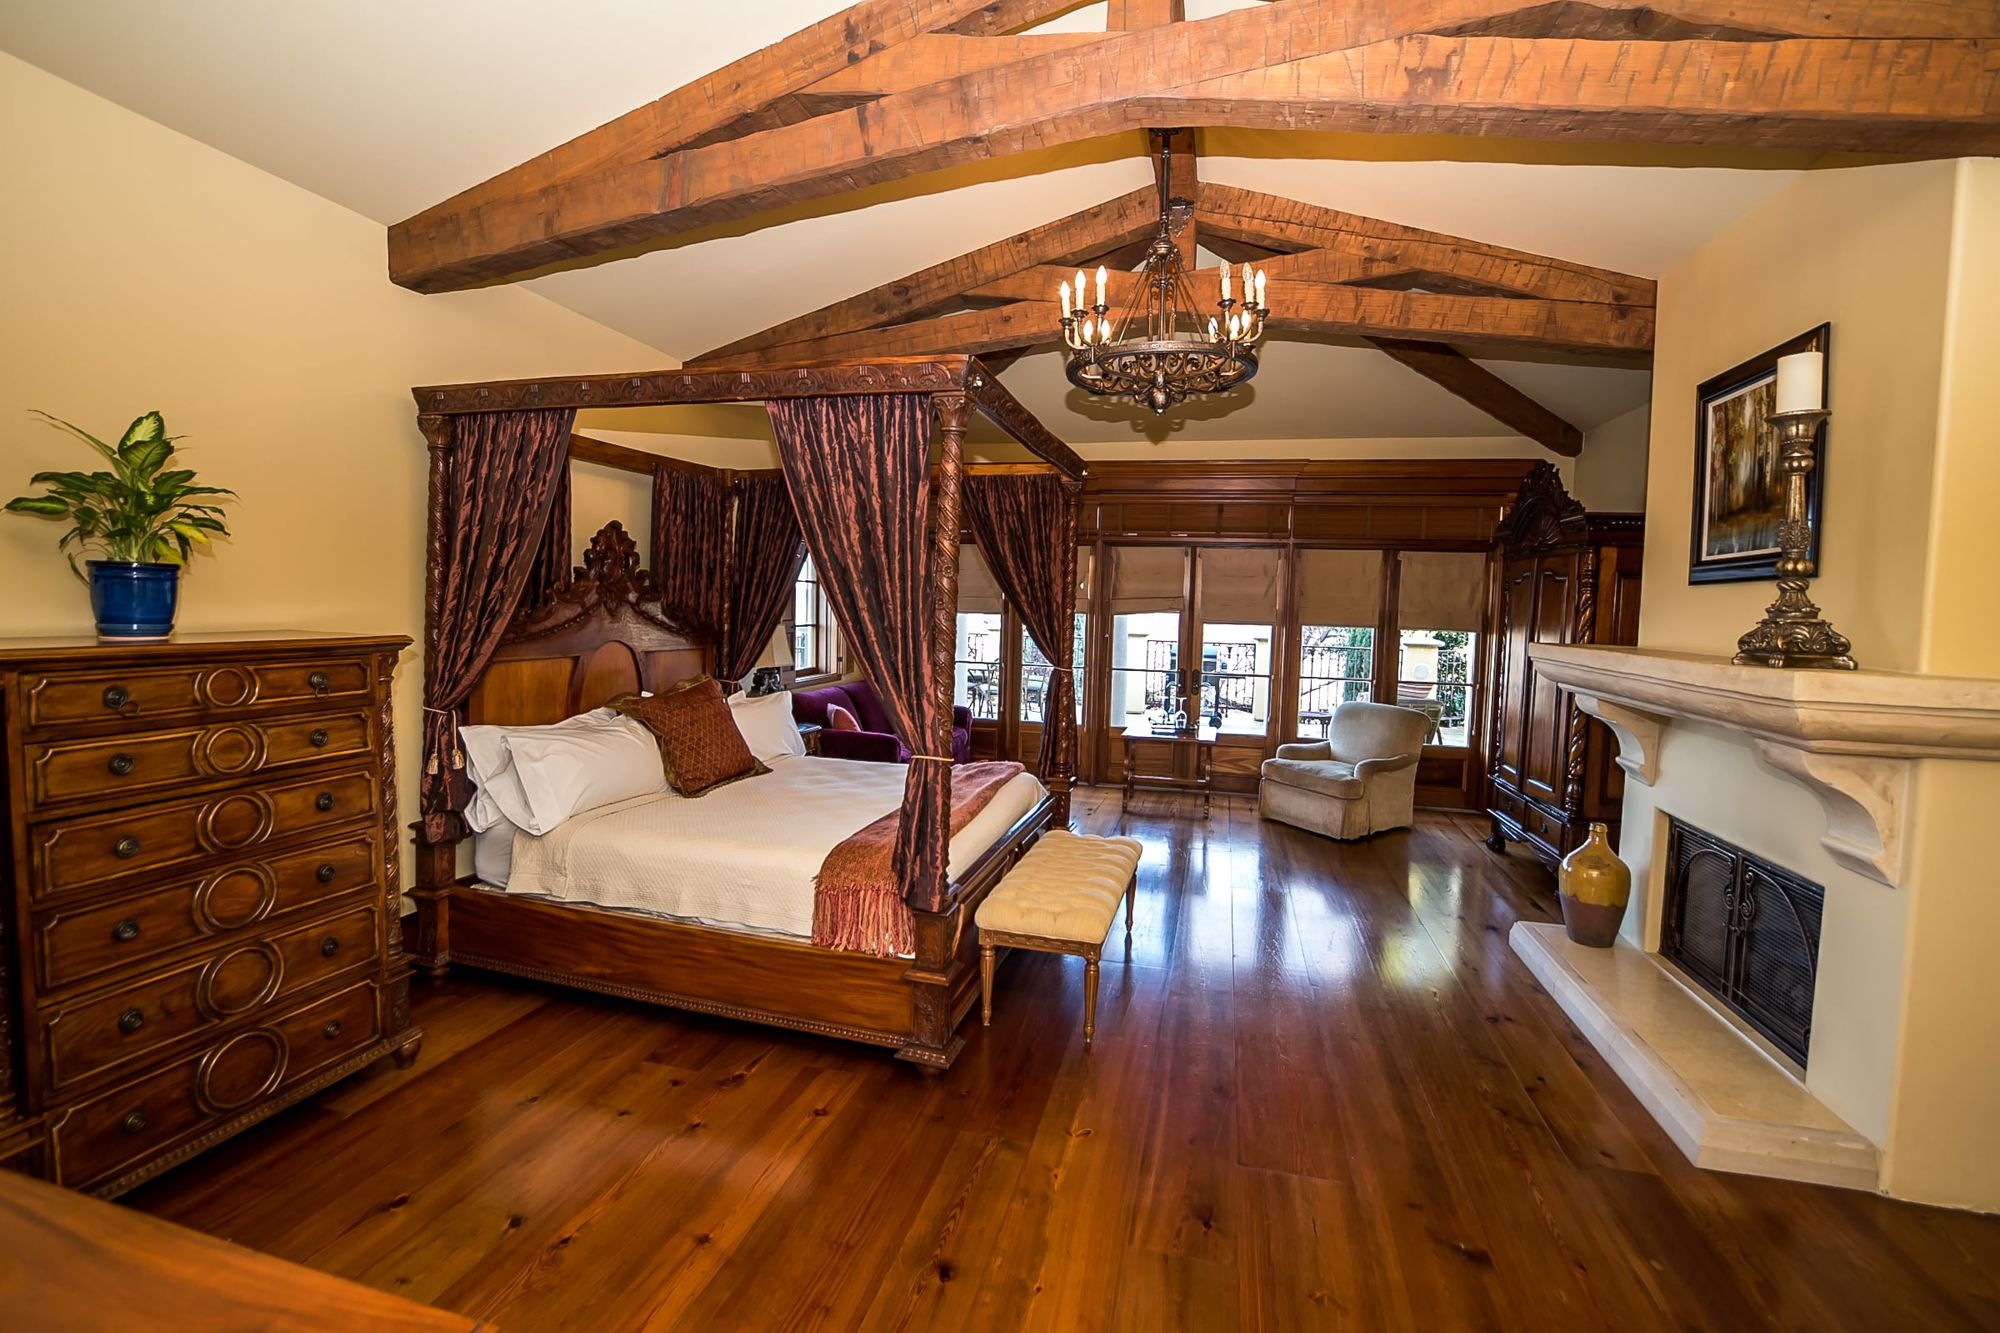 Big wooden rafters with canopy bed to the left and chest of drawers and decorative fireplace to the left